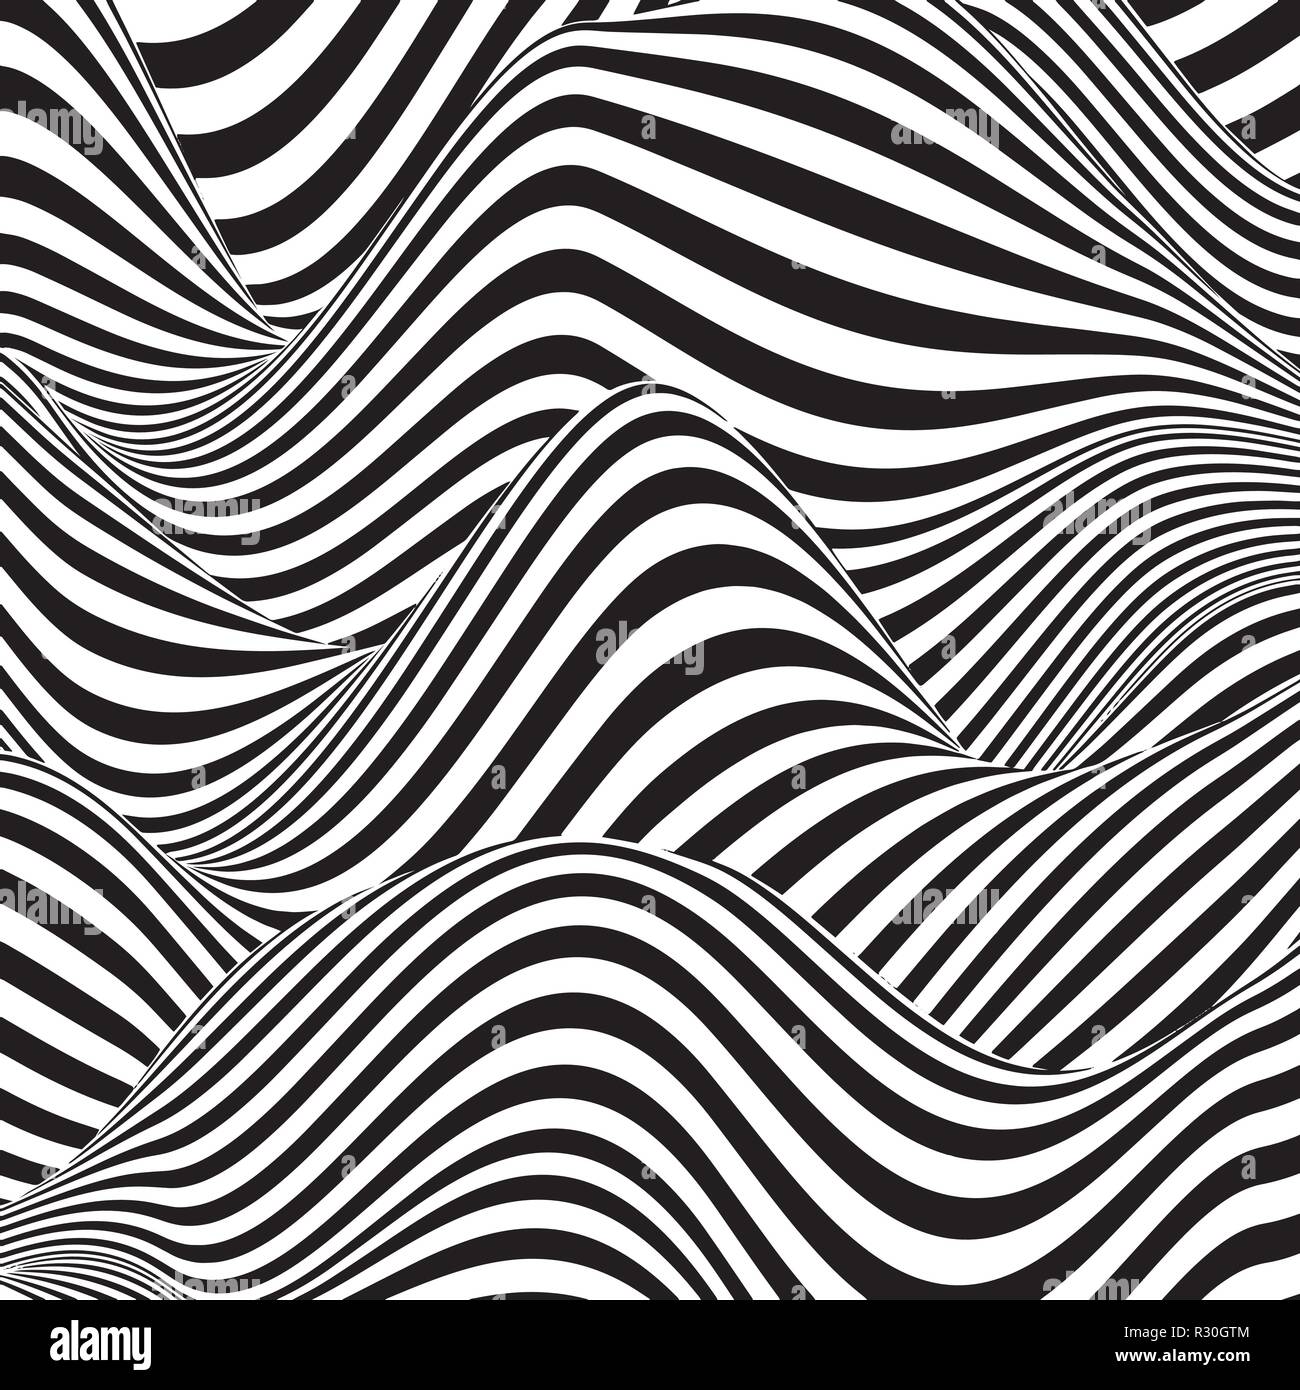 Optical illusion lines background abstract 3d Vector Image